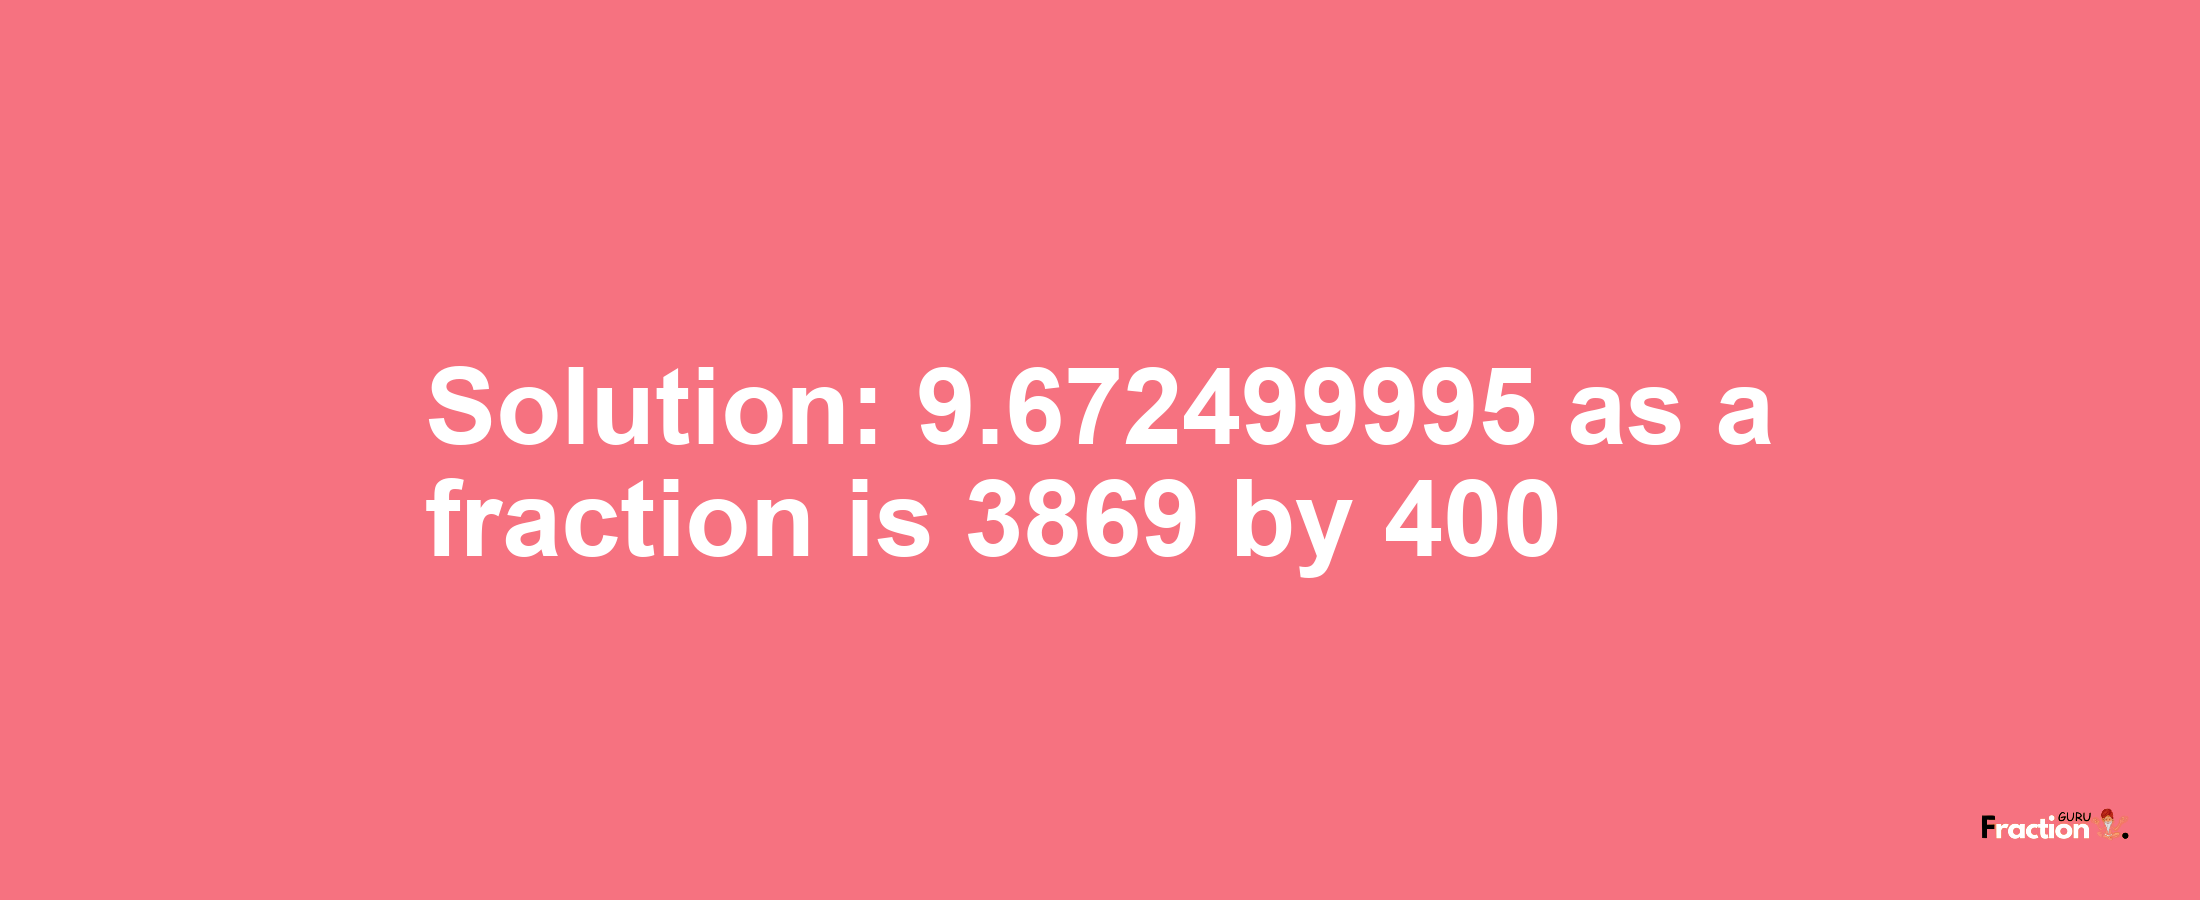 Solution:9.672499995 as a fraction is 3869/400